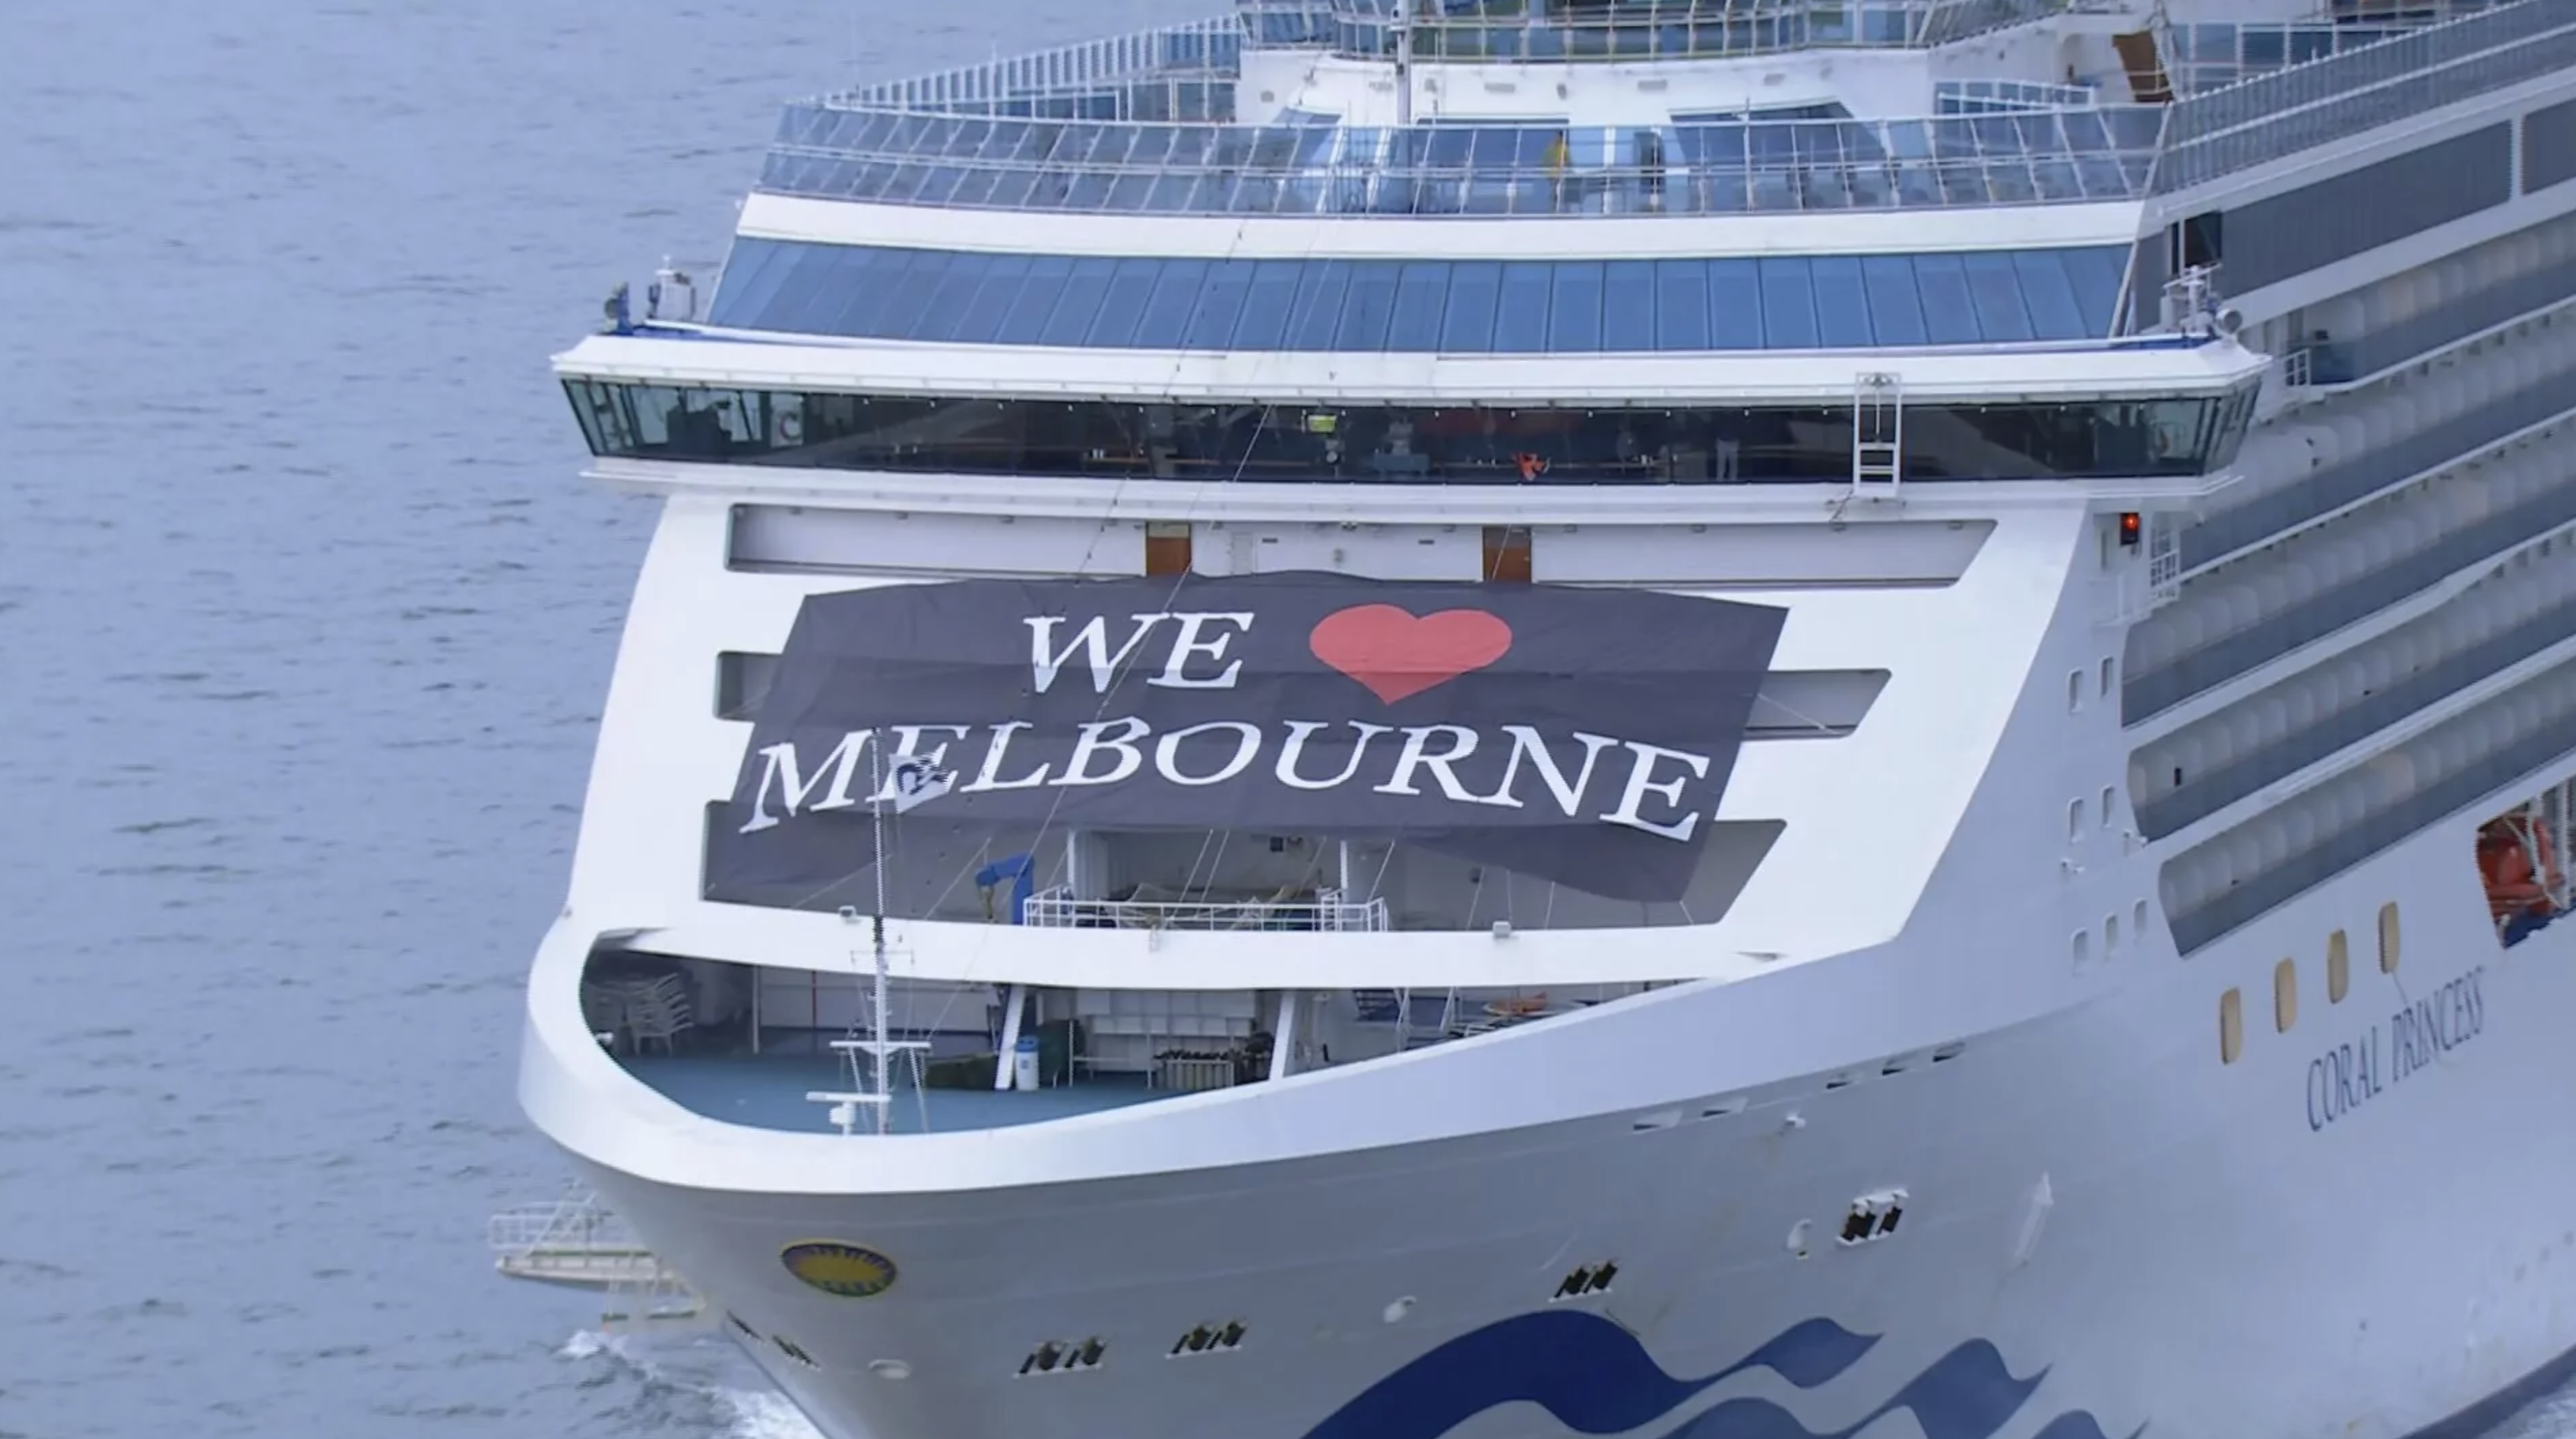 Melbourne cruise deals Princess ship with sign